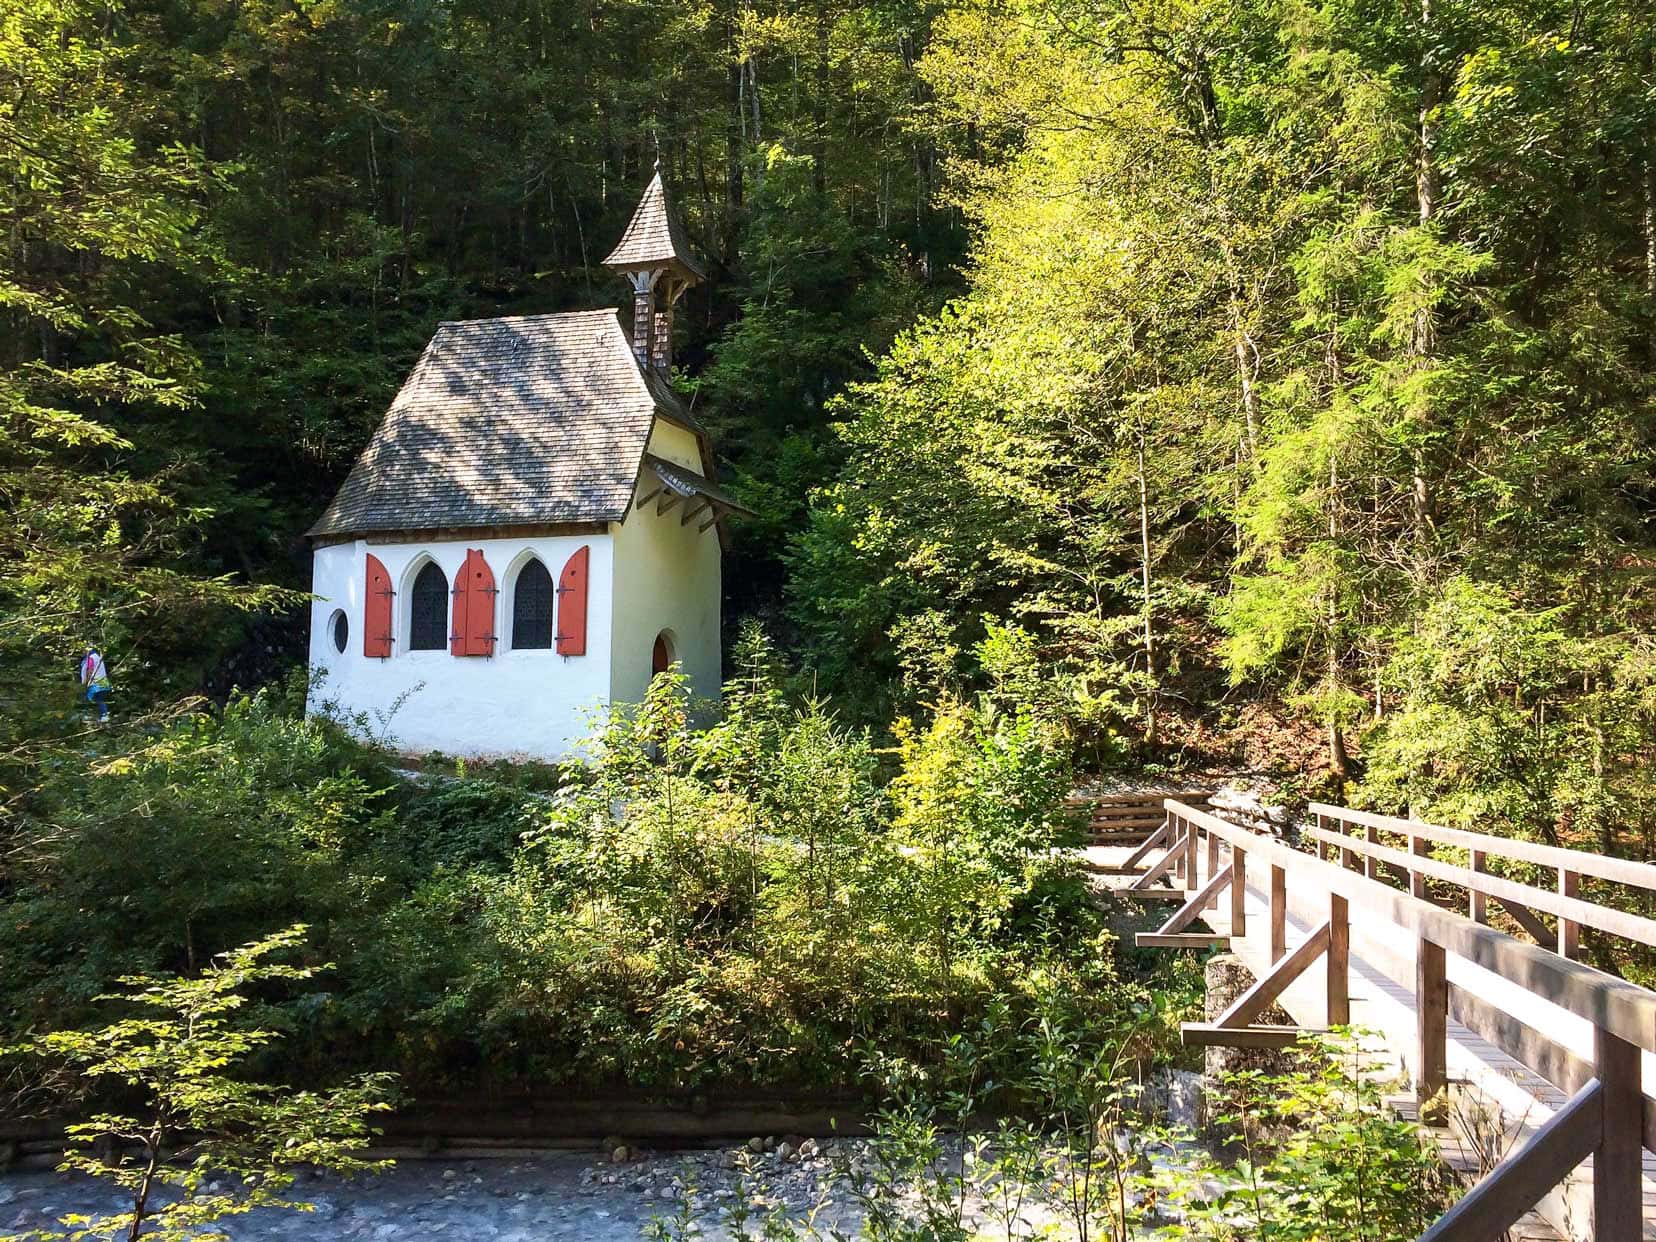 St Johann and Paul Chapel at Lake Konigssee - a small white walled chapel with red shutters either side of two arched windows